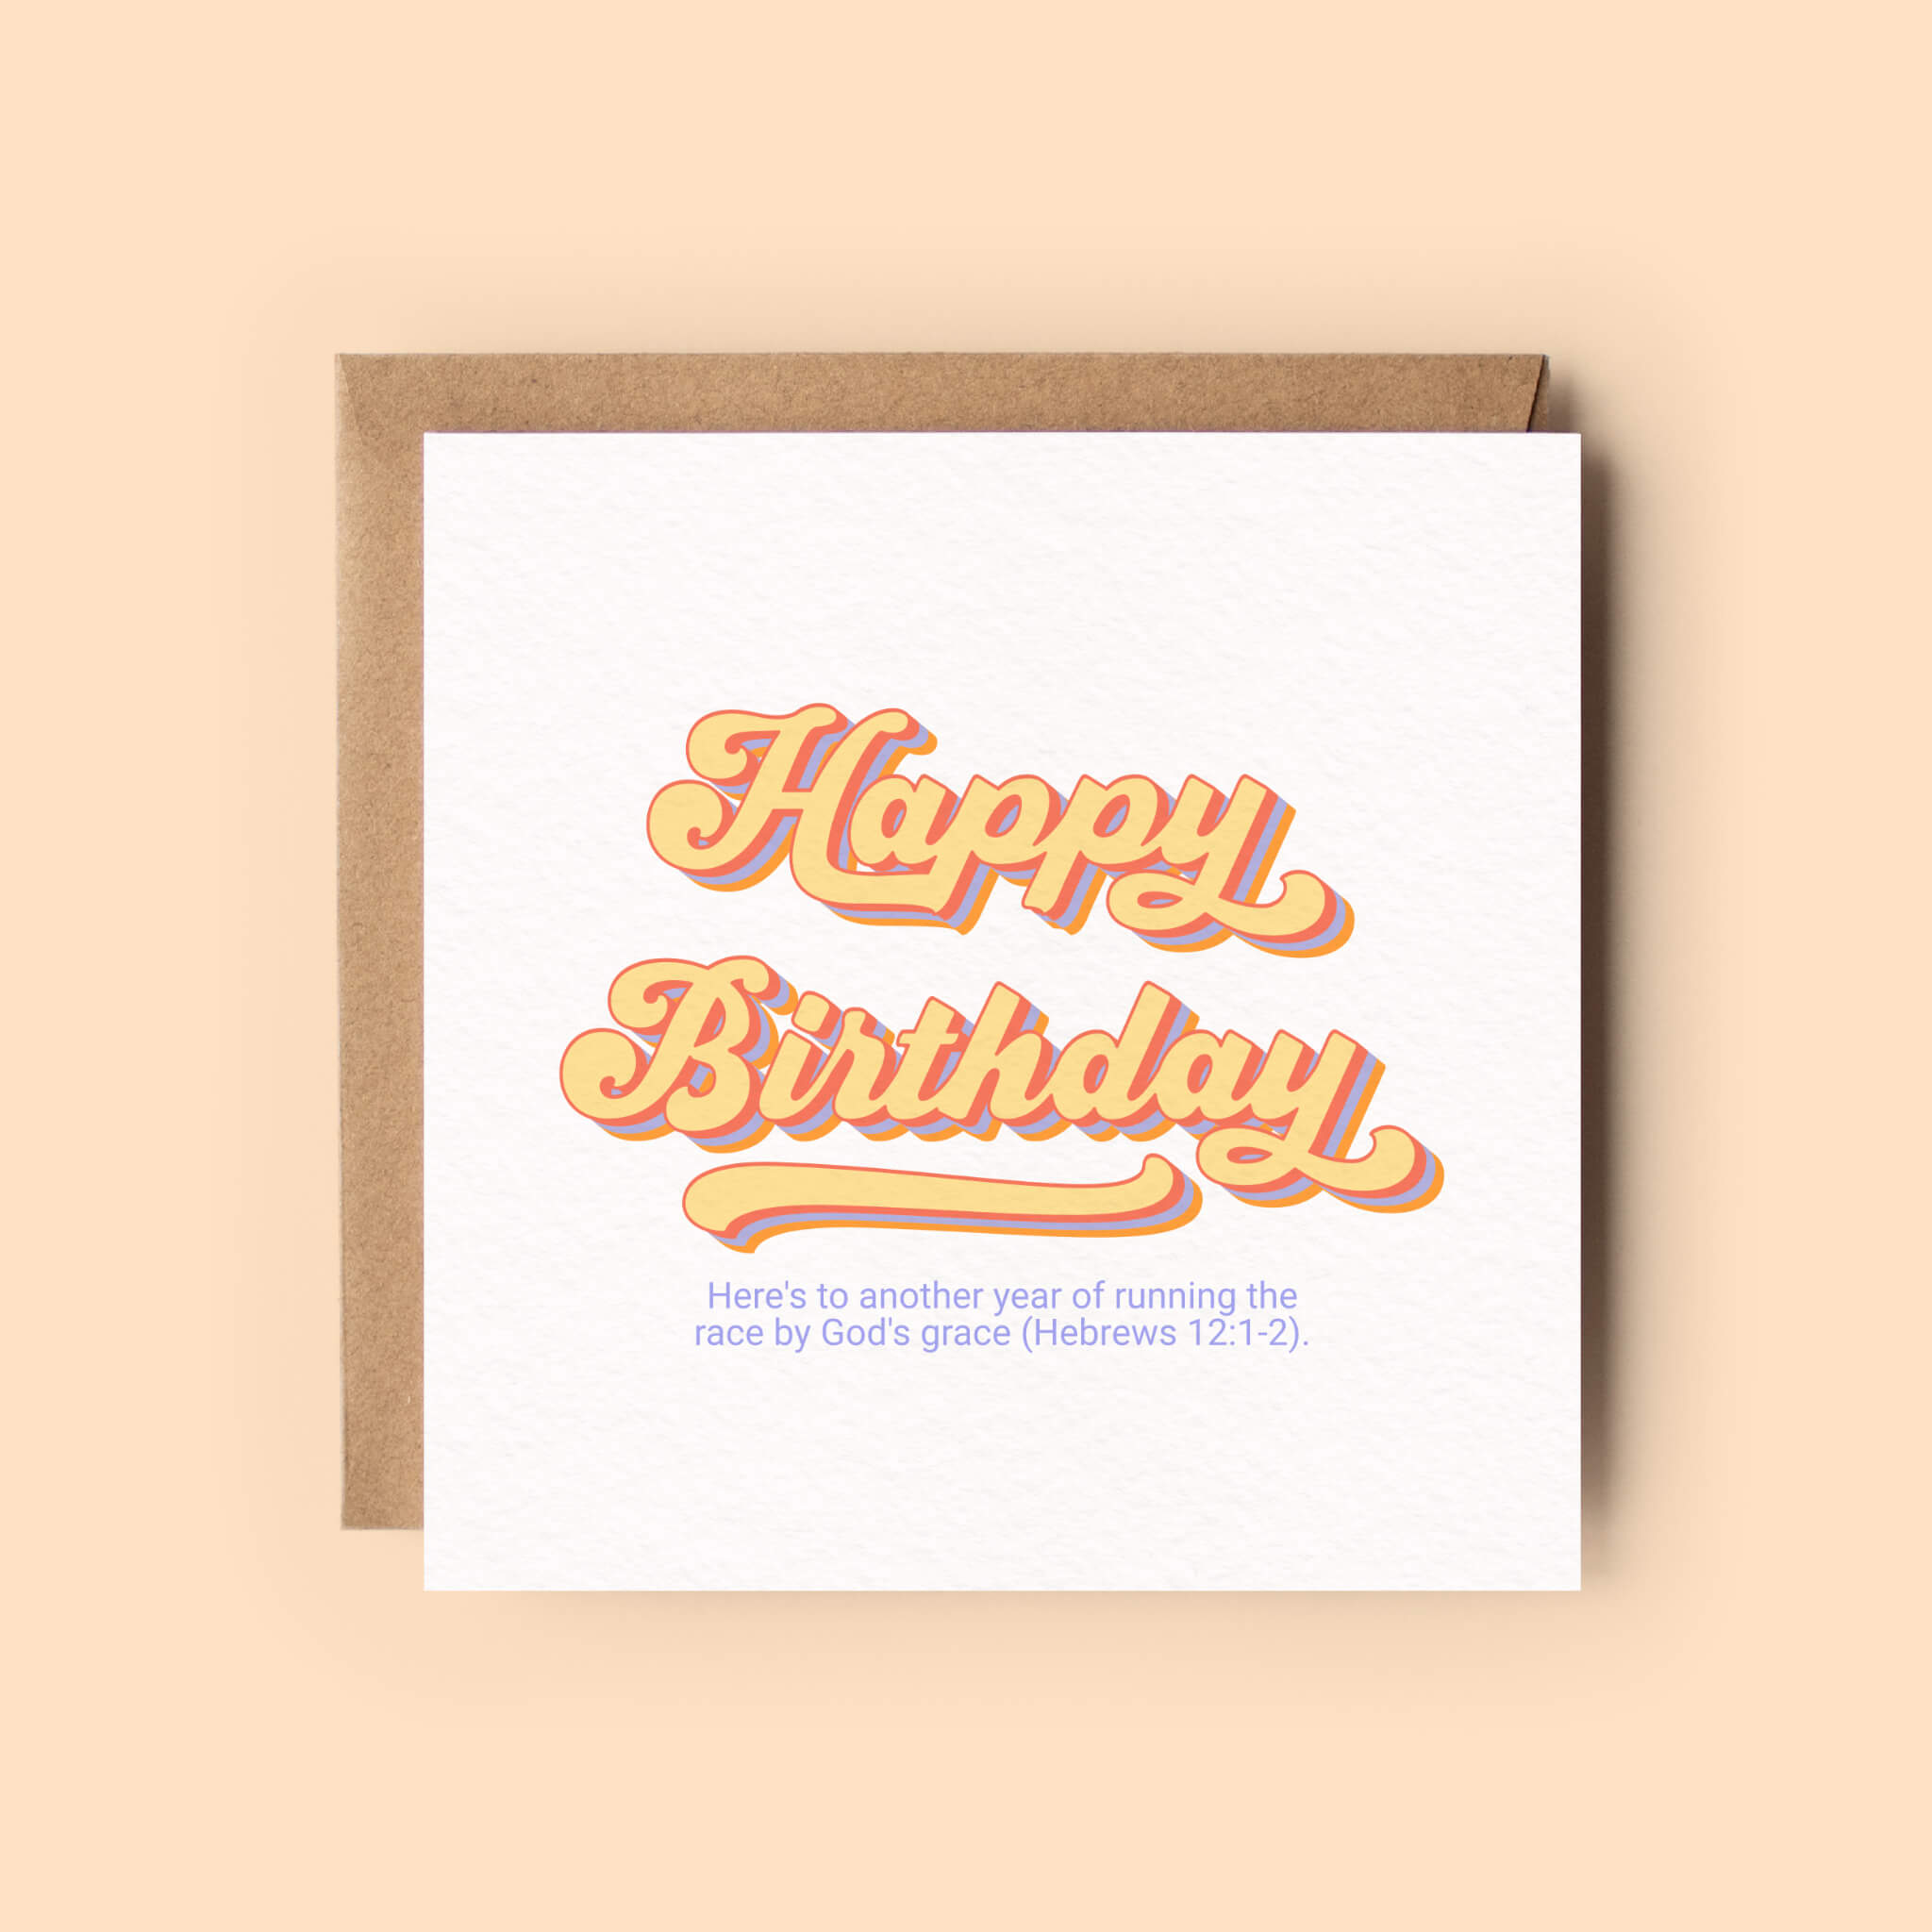 christian birthday wishes cards